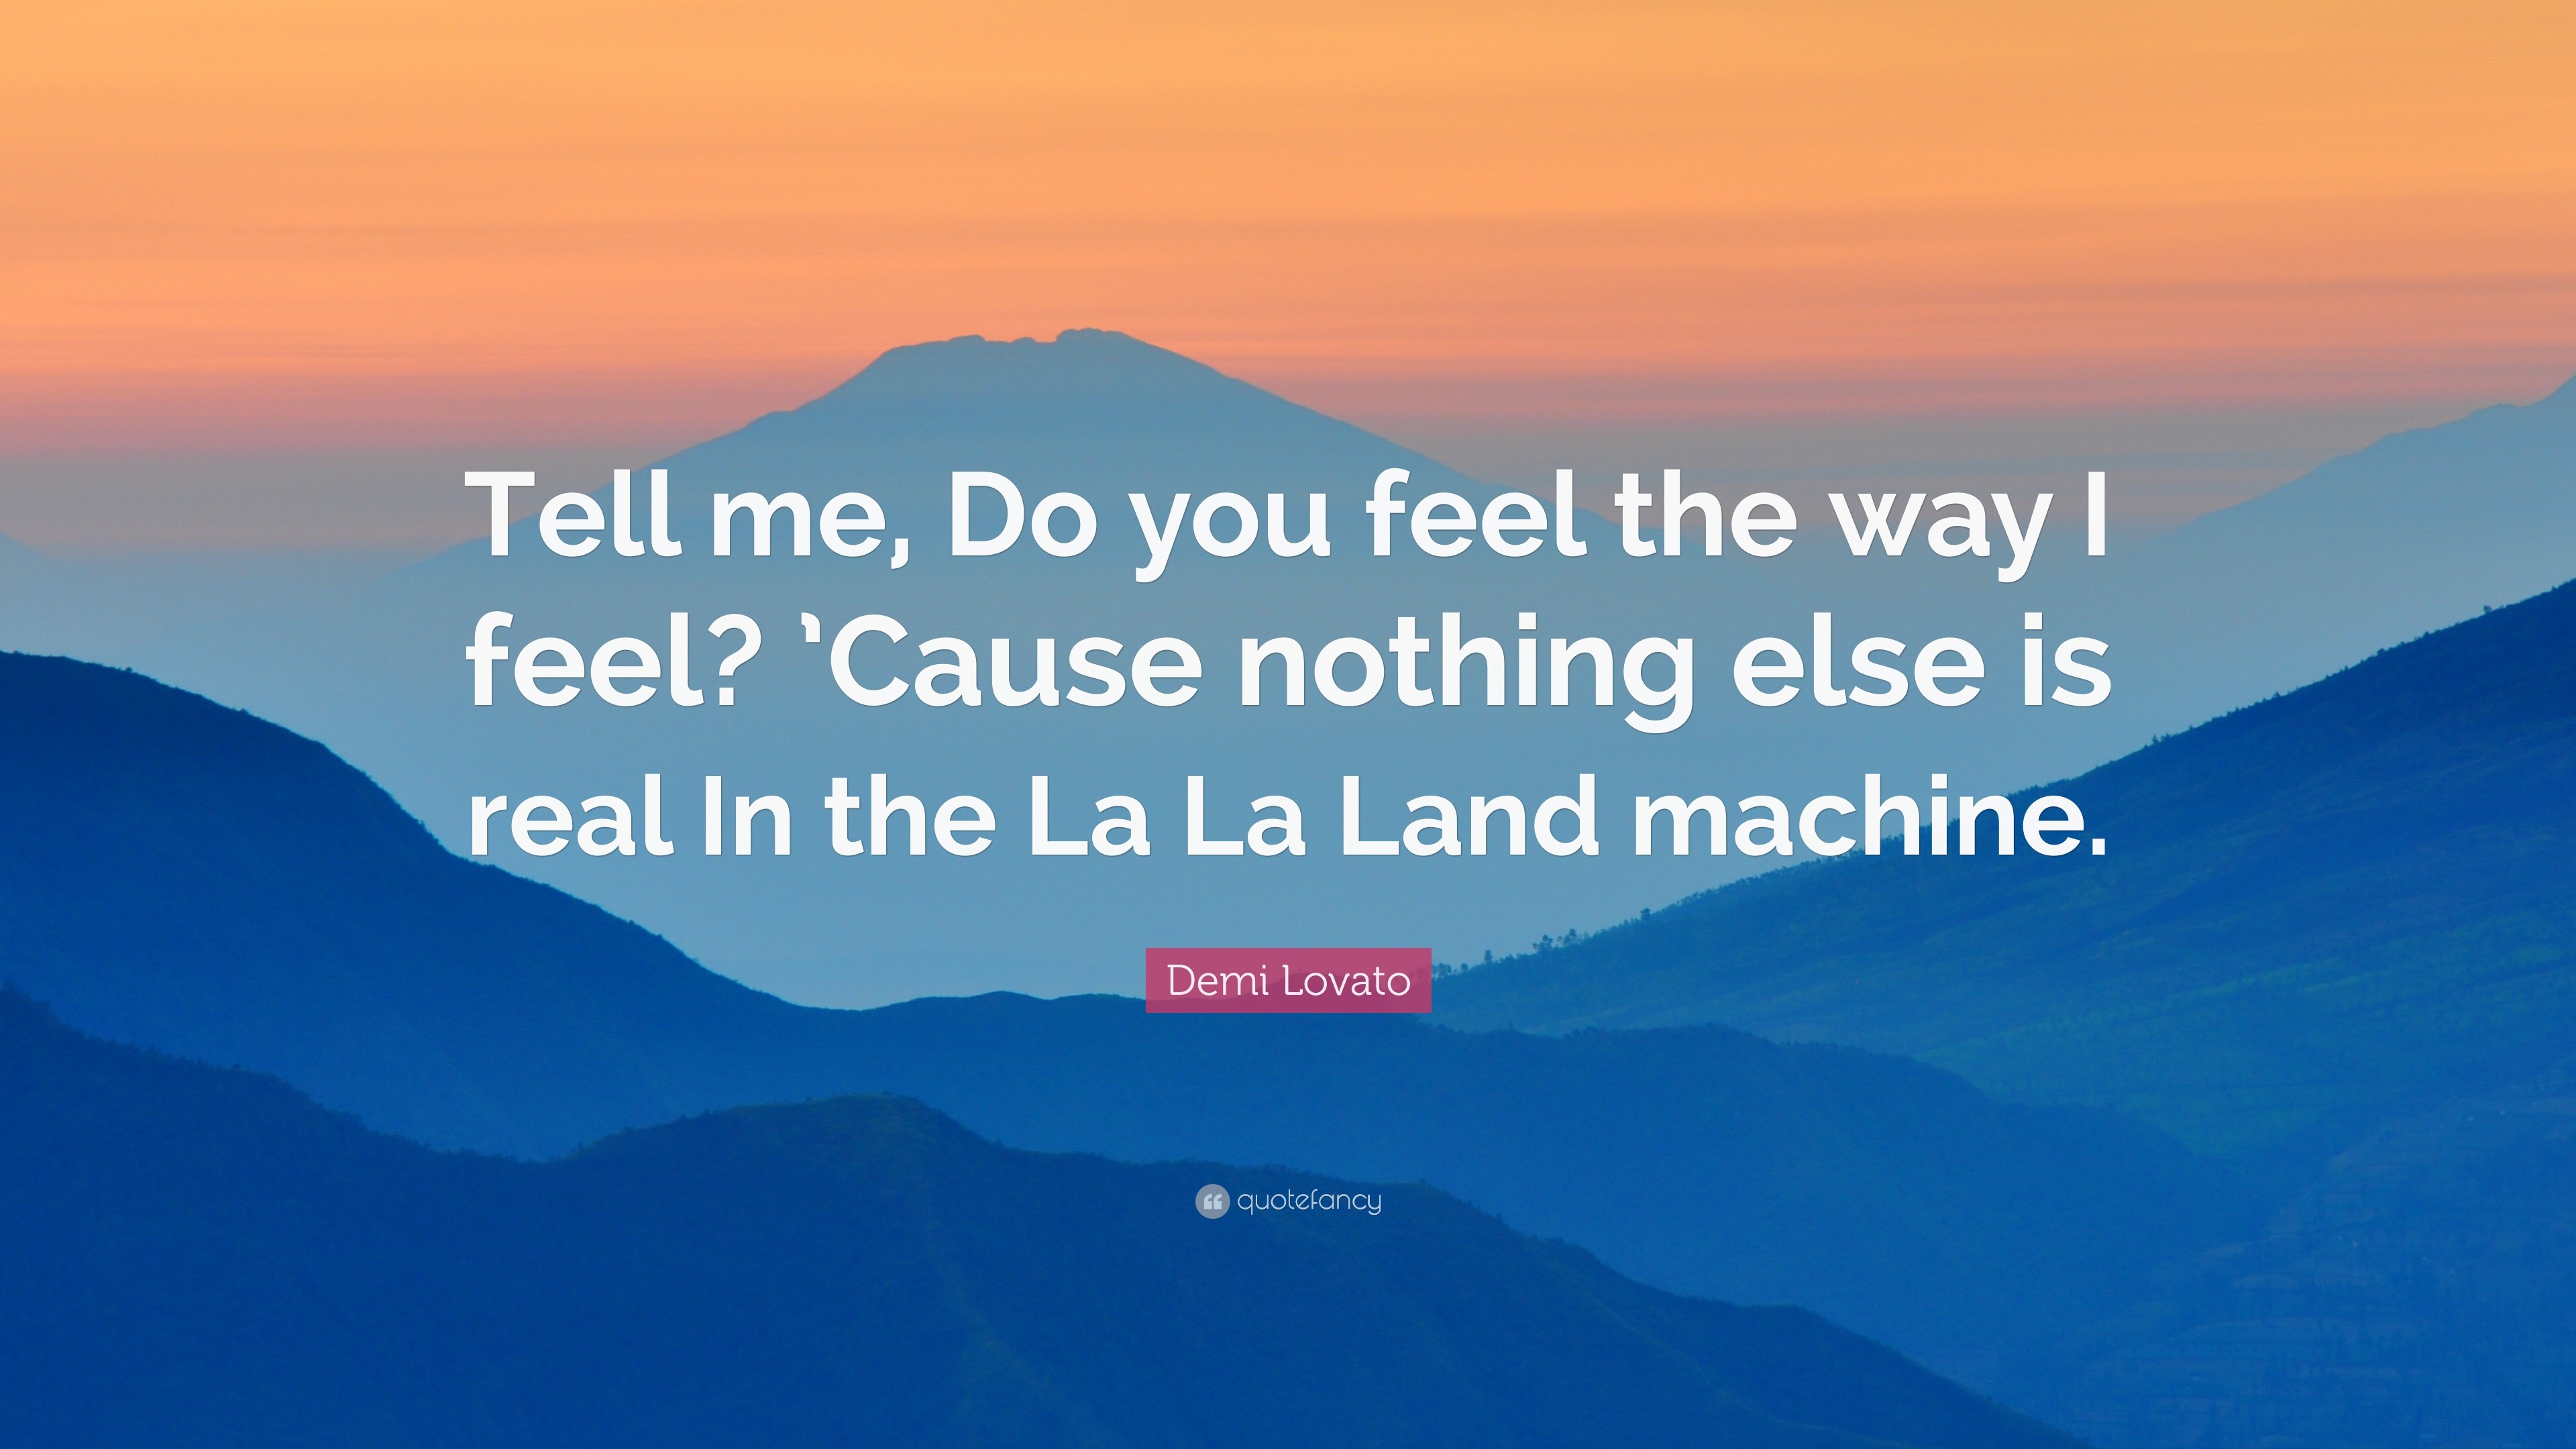 Demi Lovato Quote Tell Me Do You Feel The Way I Feel Cause Nothing Else Is Real In The La La Land Machine 12 Wallpapers Quotefancy